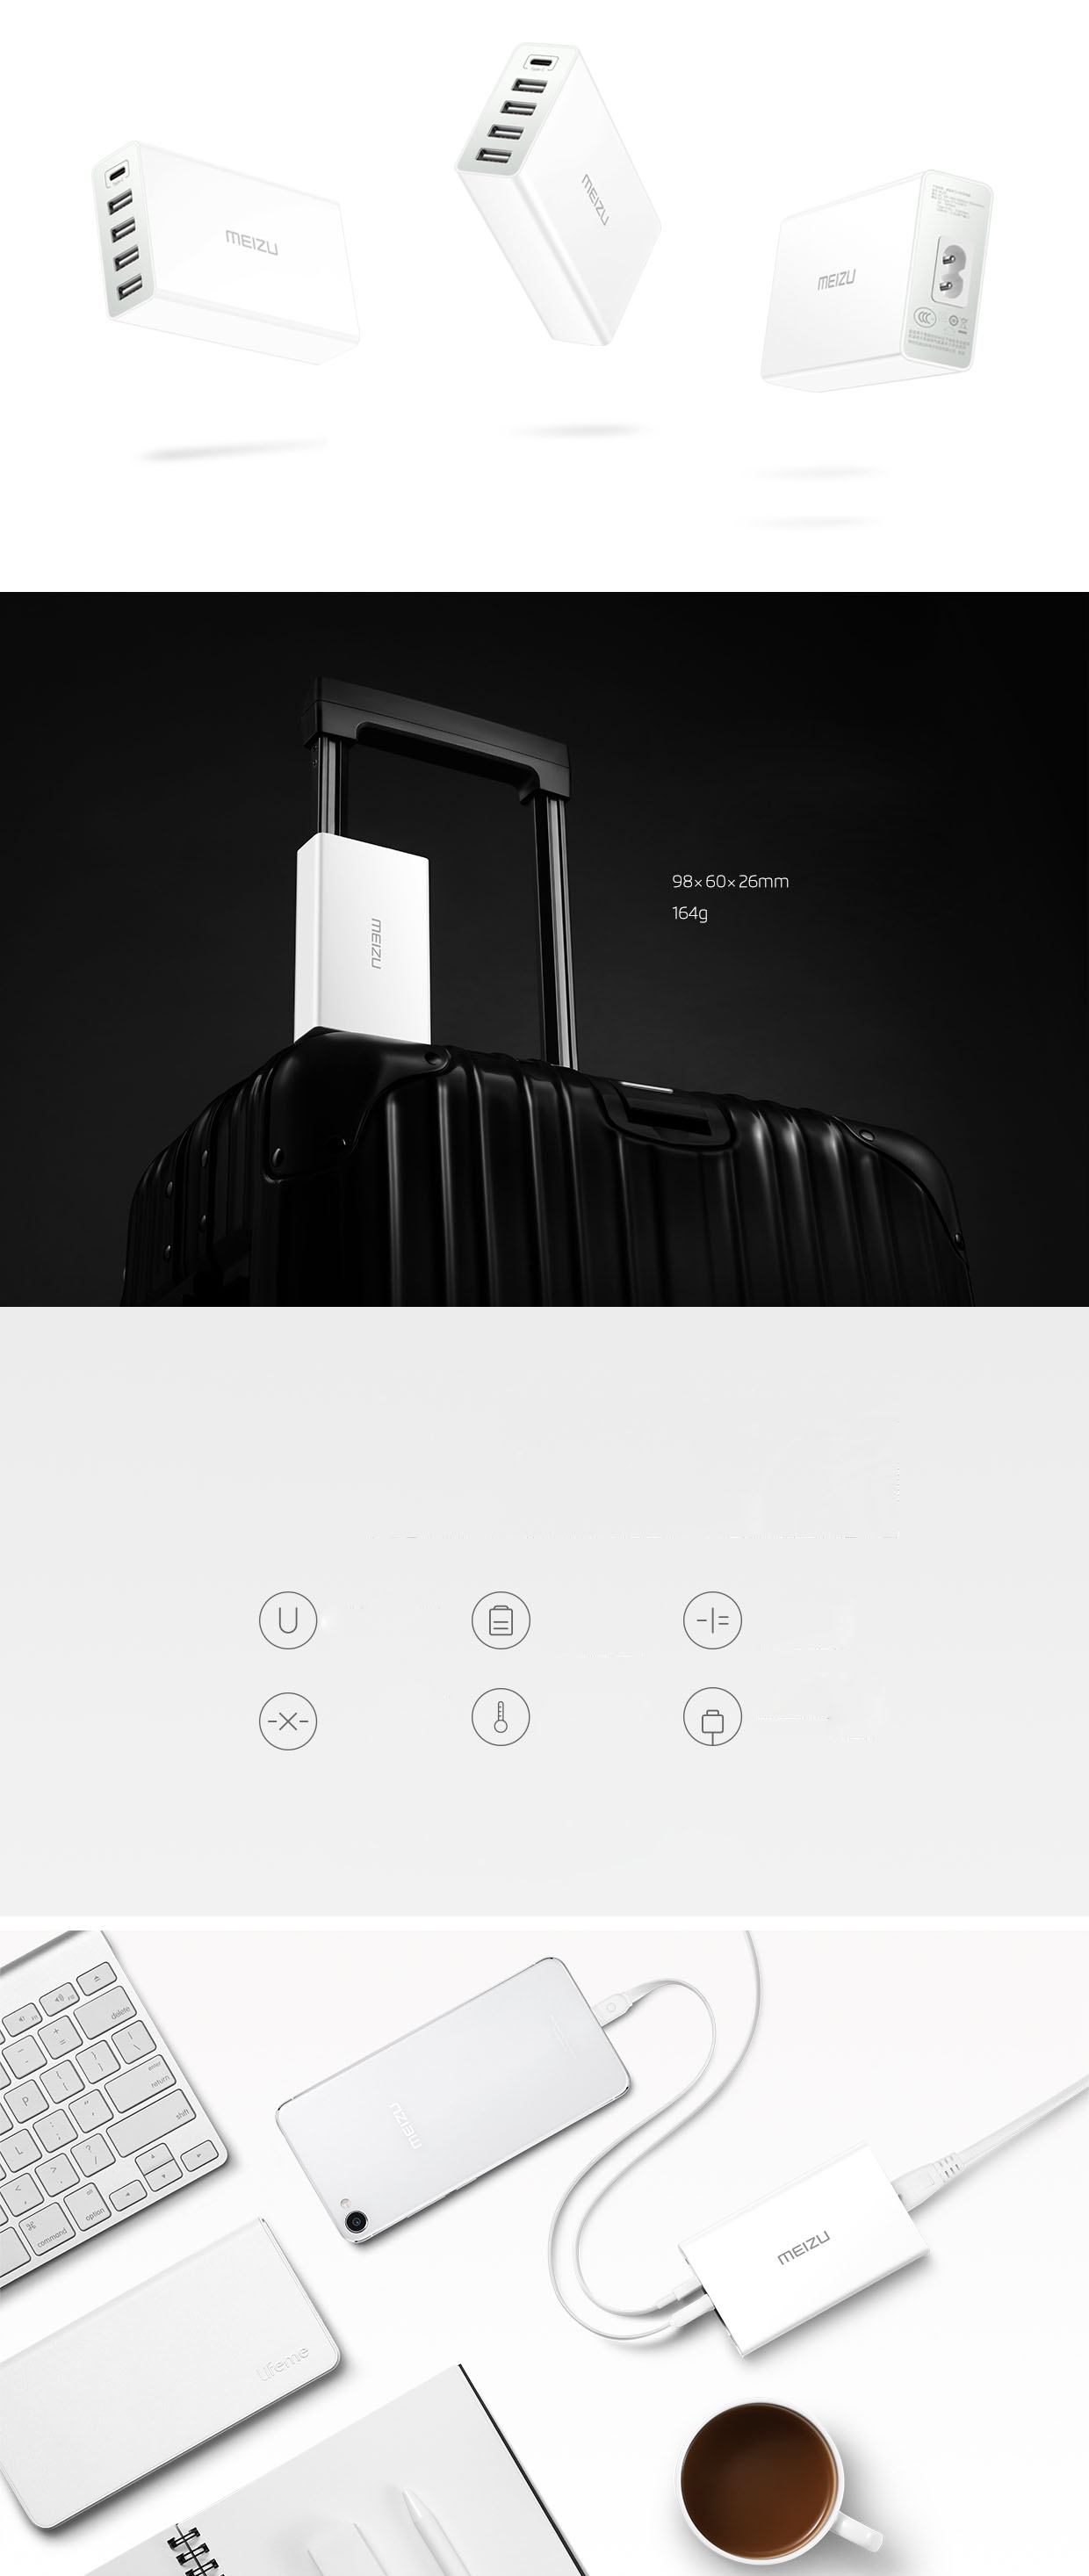 MEIZU USB Charger